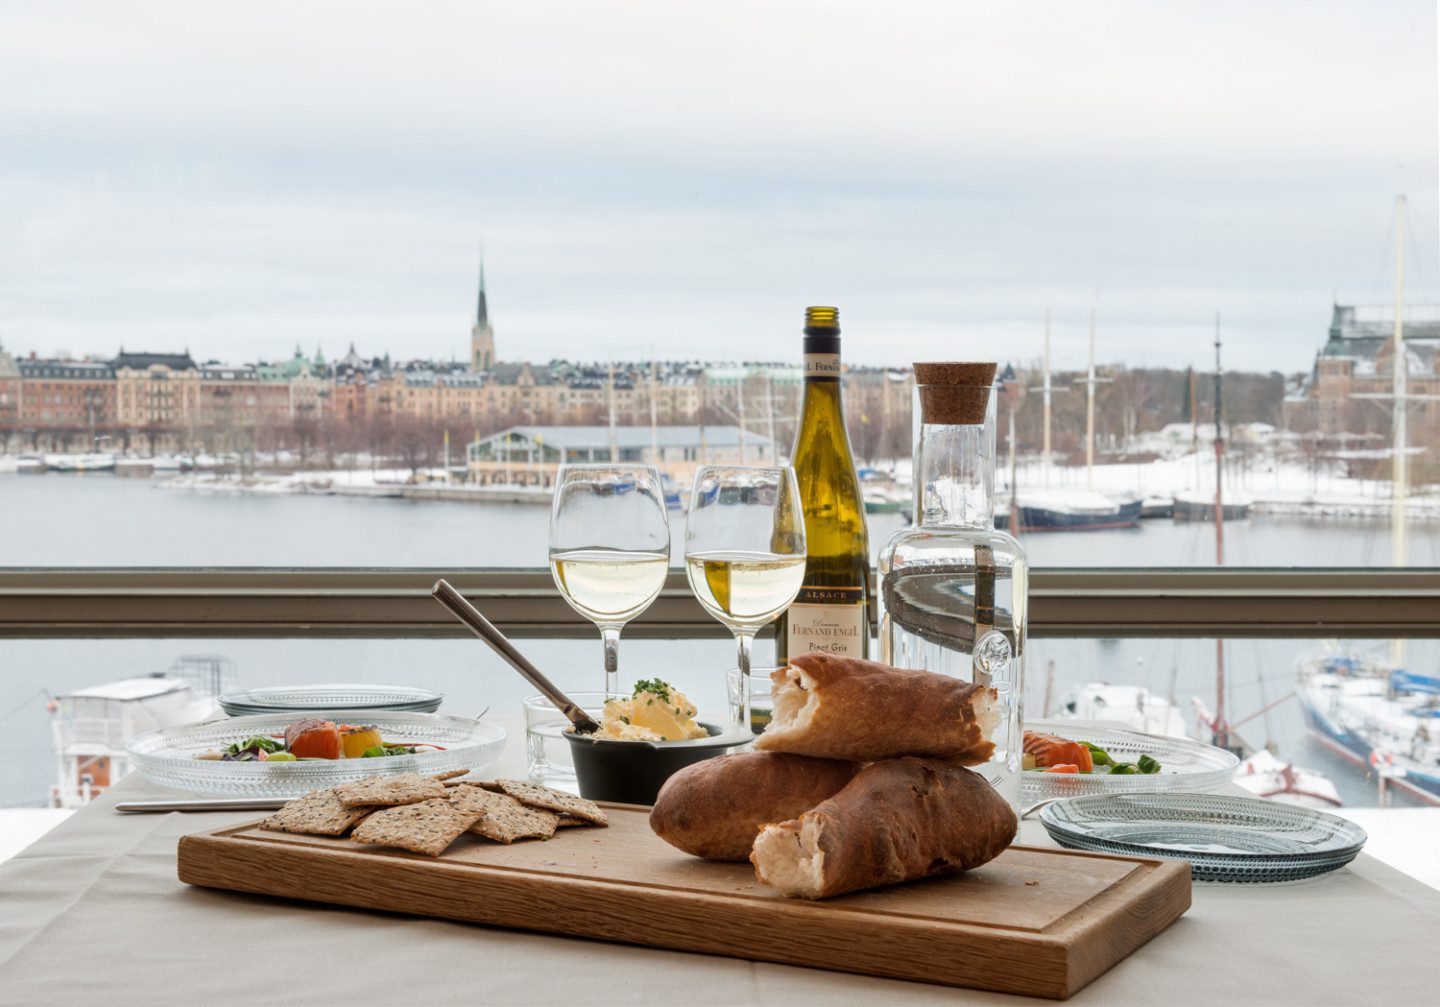  Wine glasses, bread and plates in front of the view from Moderna Museet's restaurant